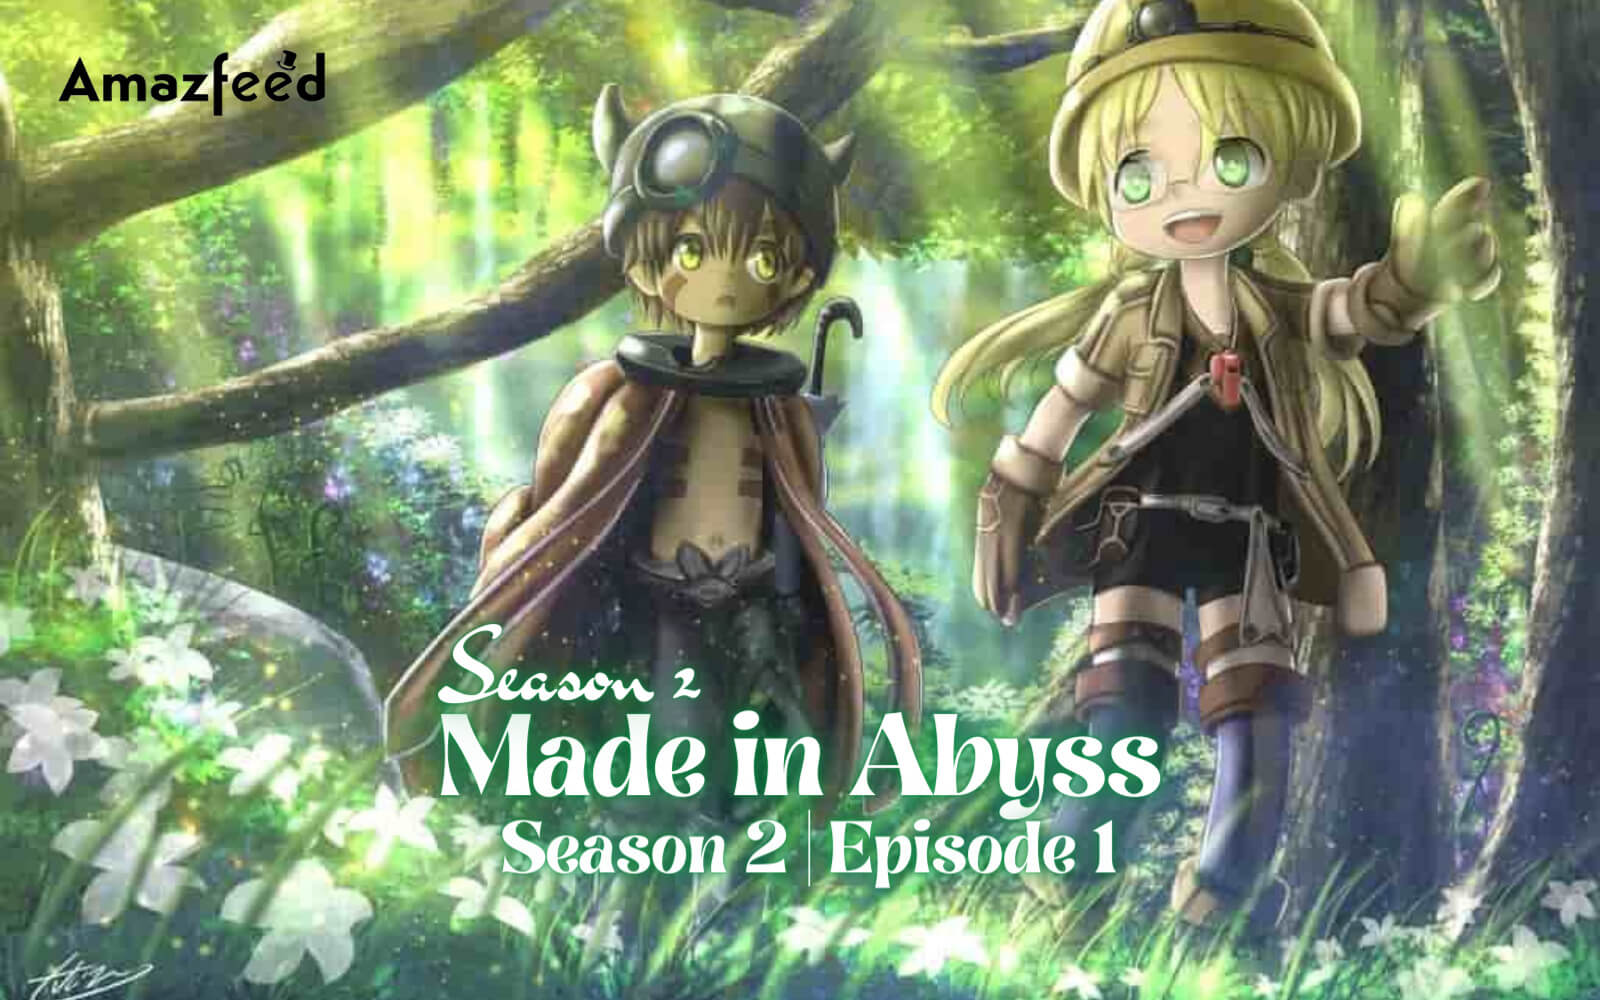 Made in Abyss Season 2 Episode 1 Release date